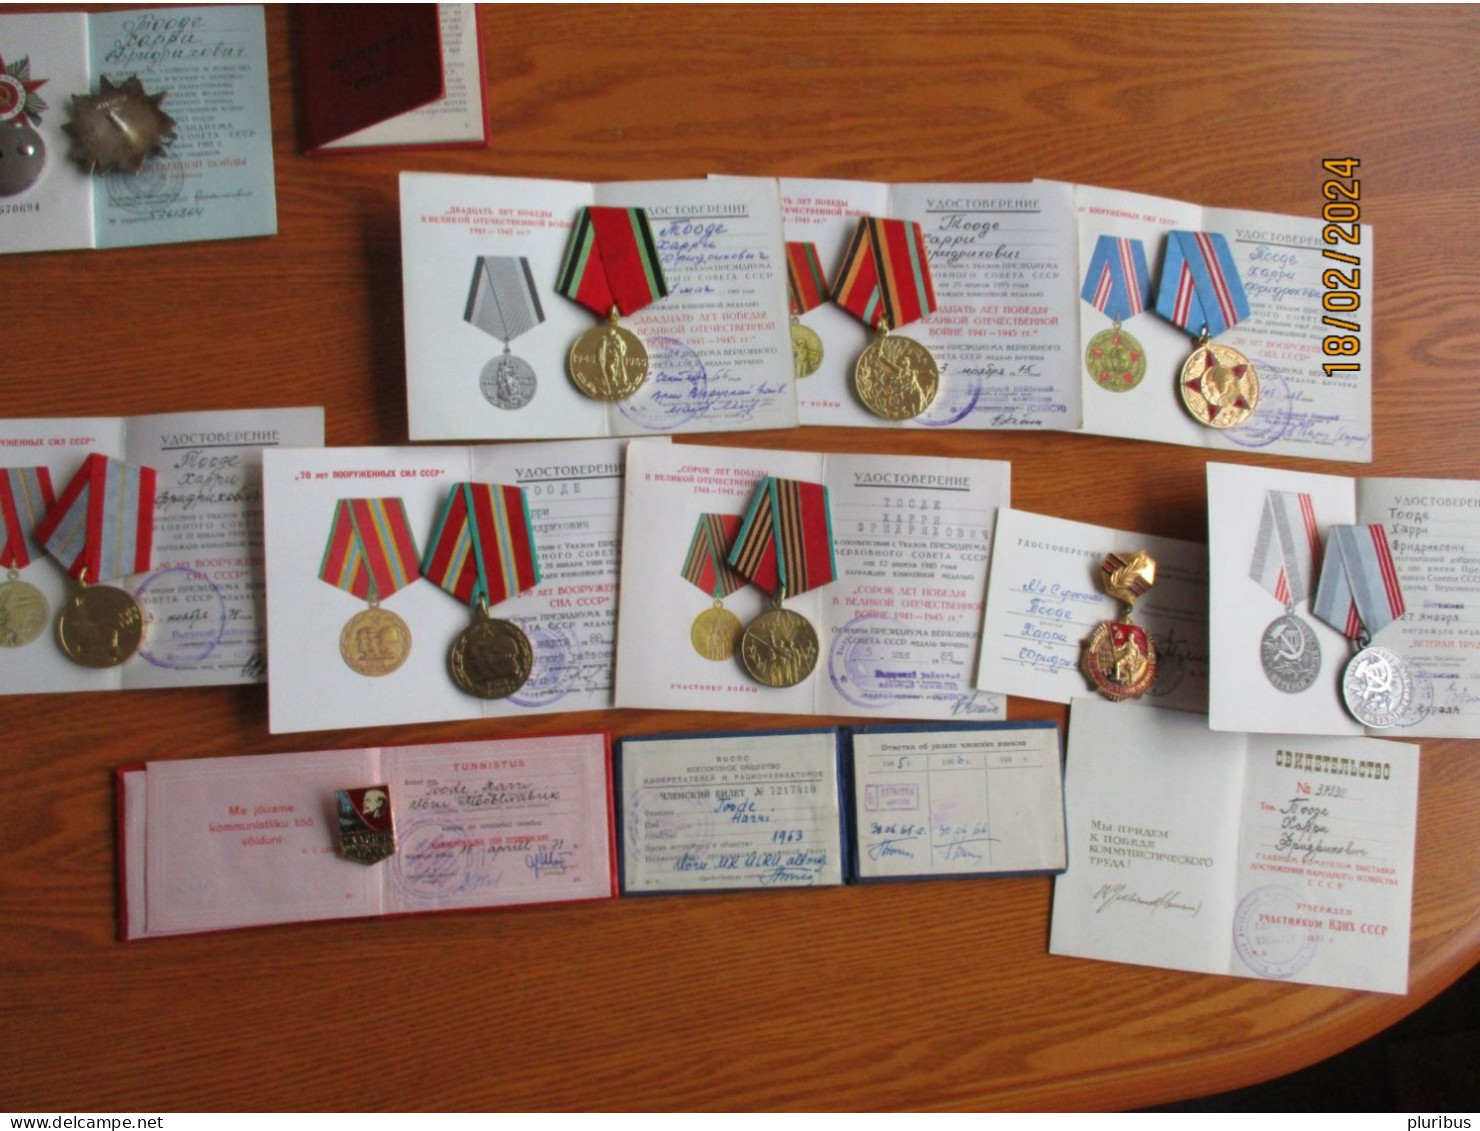 RUSSIA ESTONIA WW II SET OF SILVER ORDER AND SILVER MEDAL AND OTHER MEDALS TO ONE MAN FOR MILITARY MERITS , 19-4